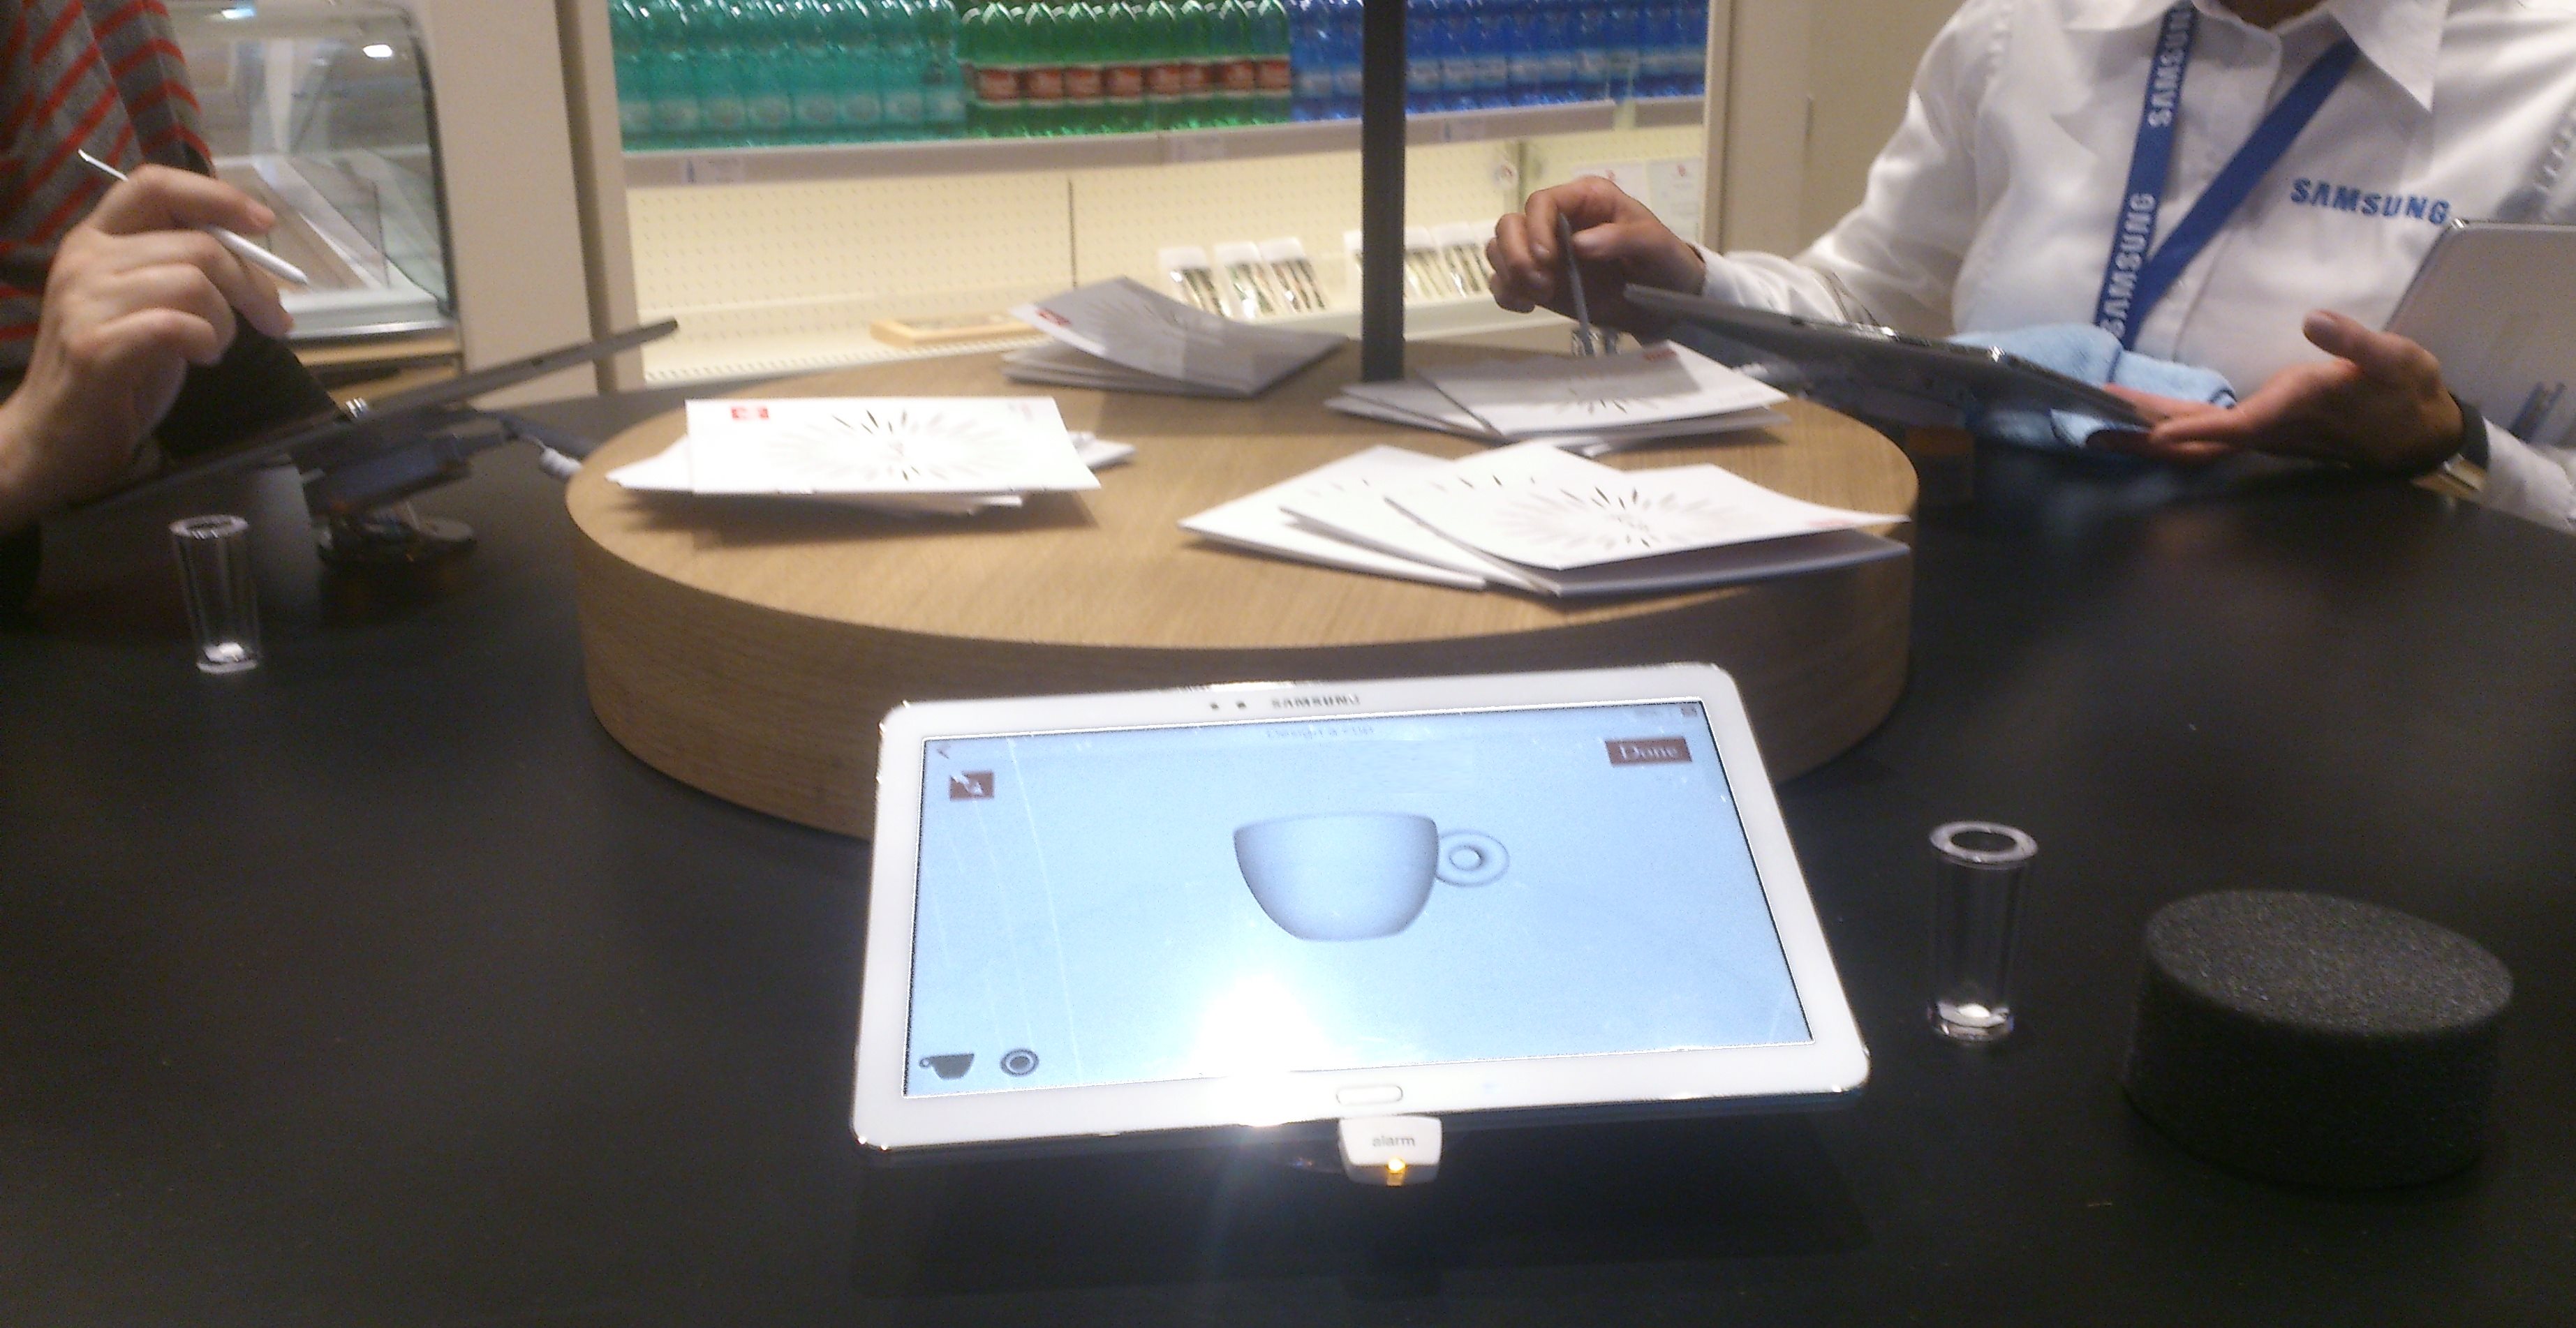 Samsung and Illy Partnership Puts Tablets in Coffee Shops